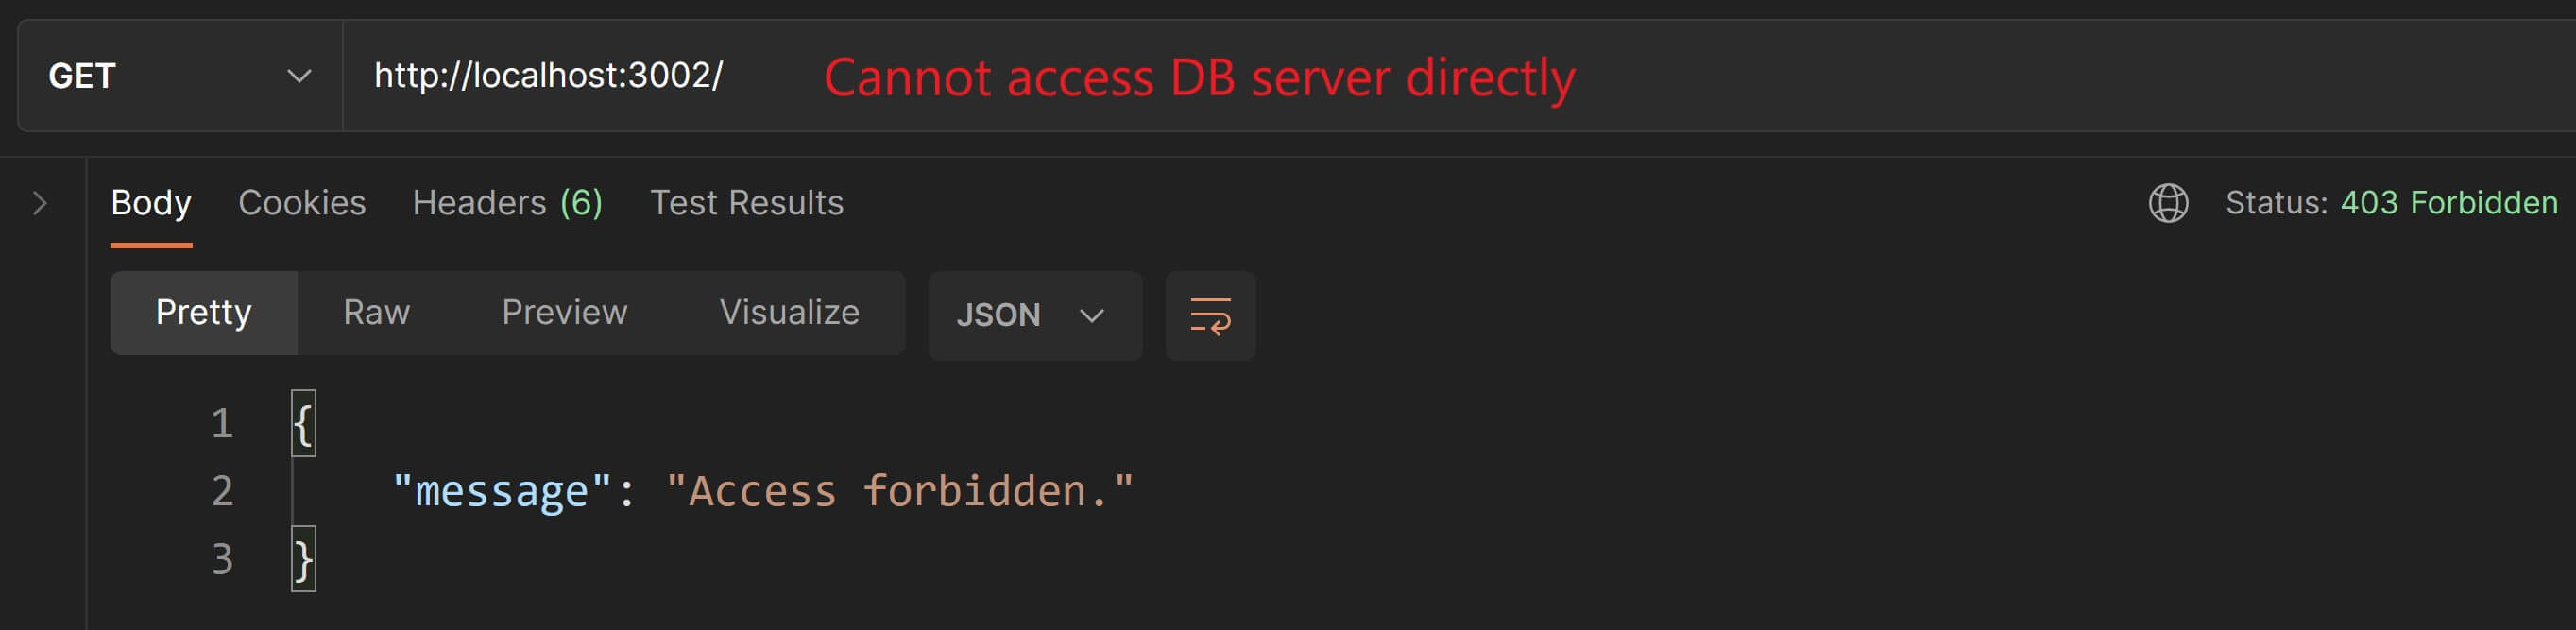 DB server returns 403 forbidden when accessed directly